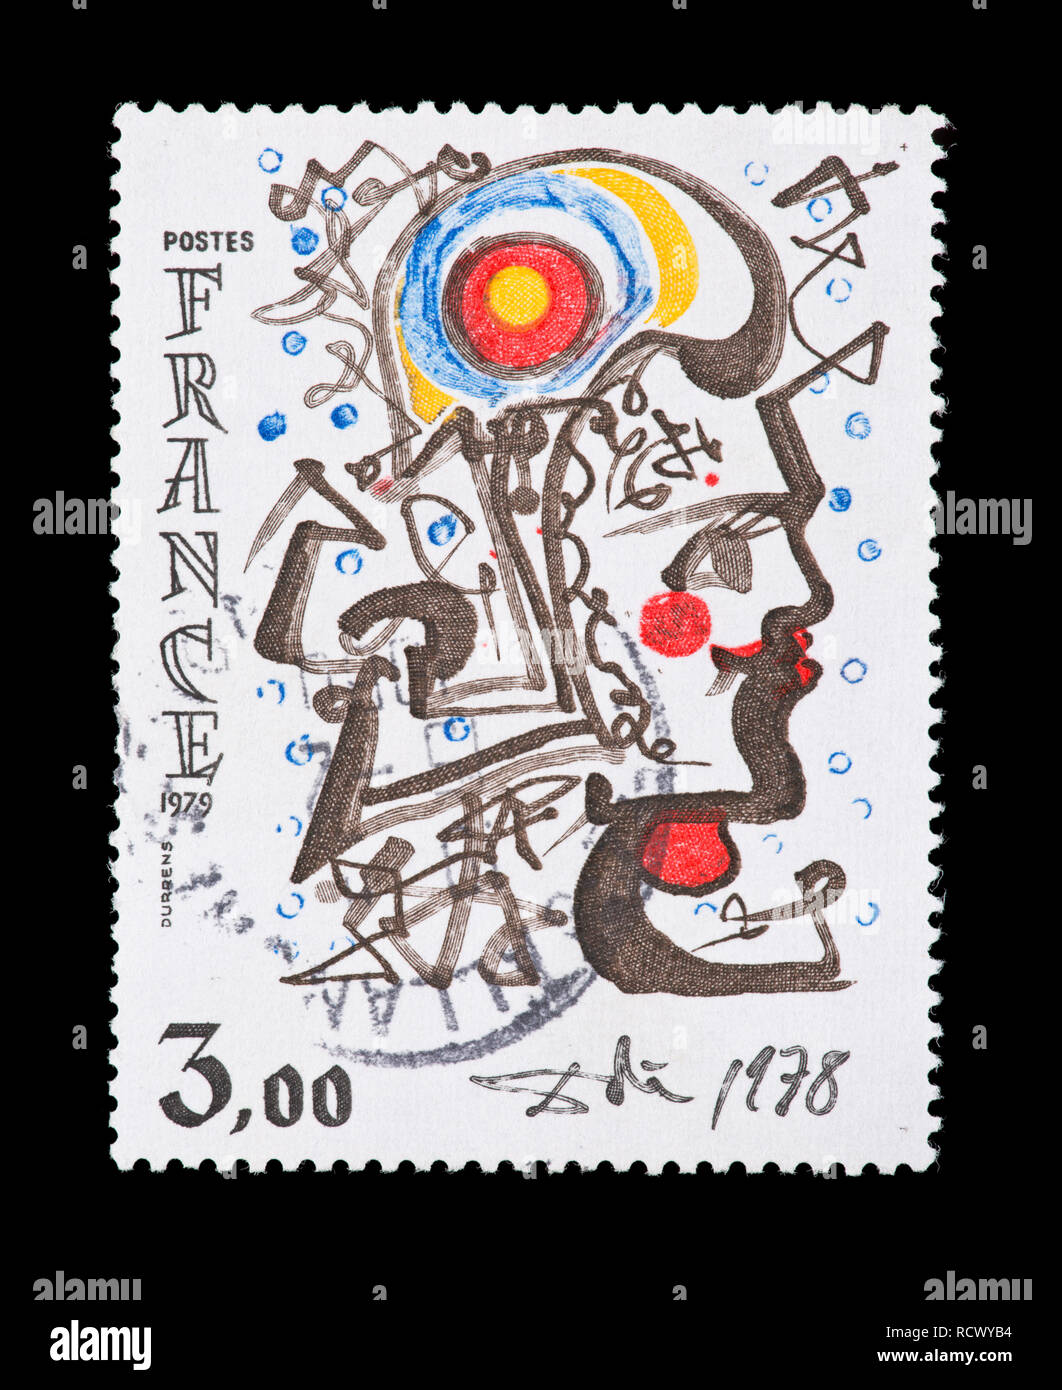 Postage stamp from France depicting the Salvador Dali painting of Head of Marianne Stock Photo